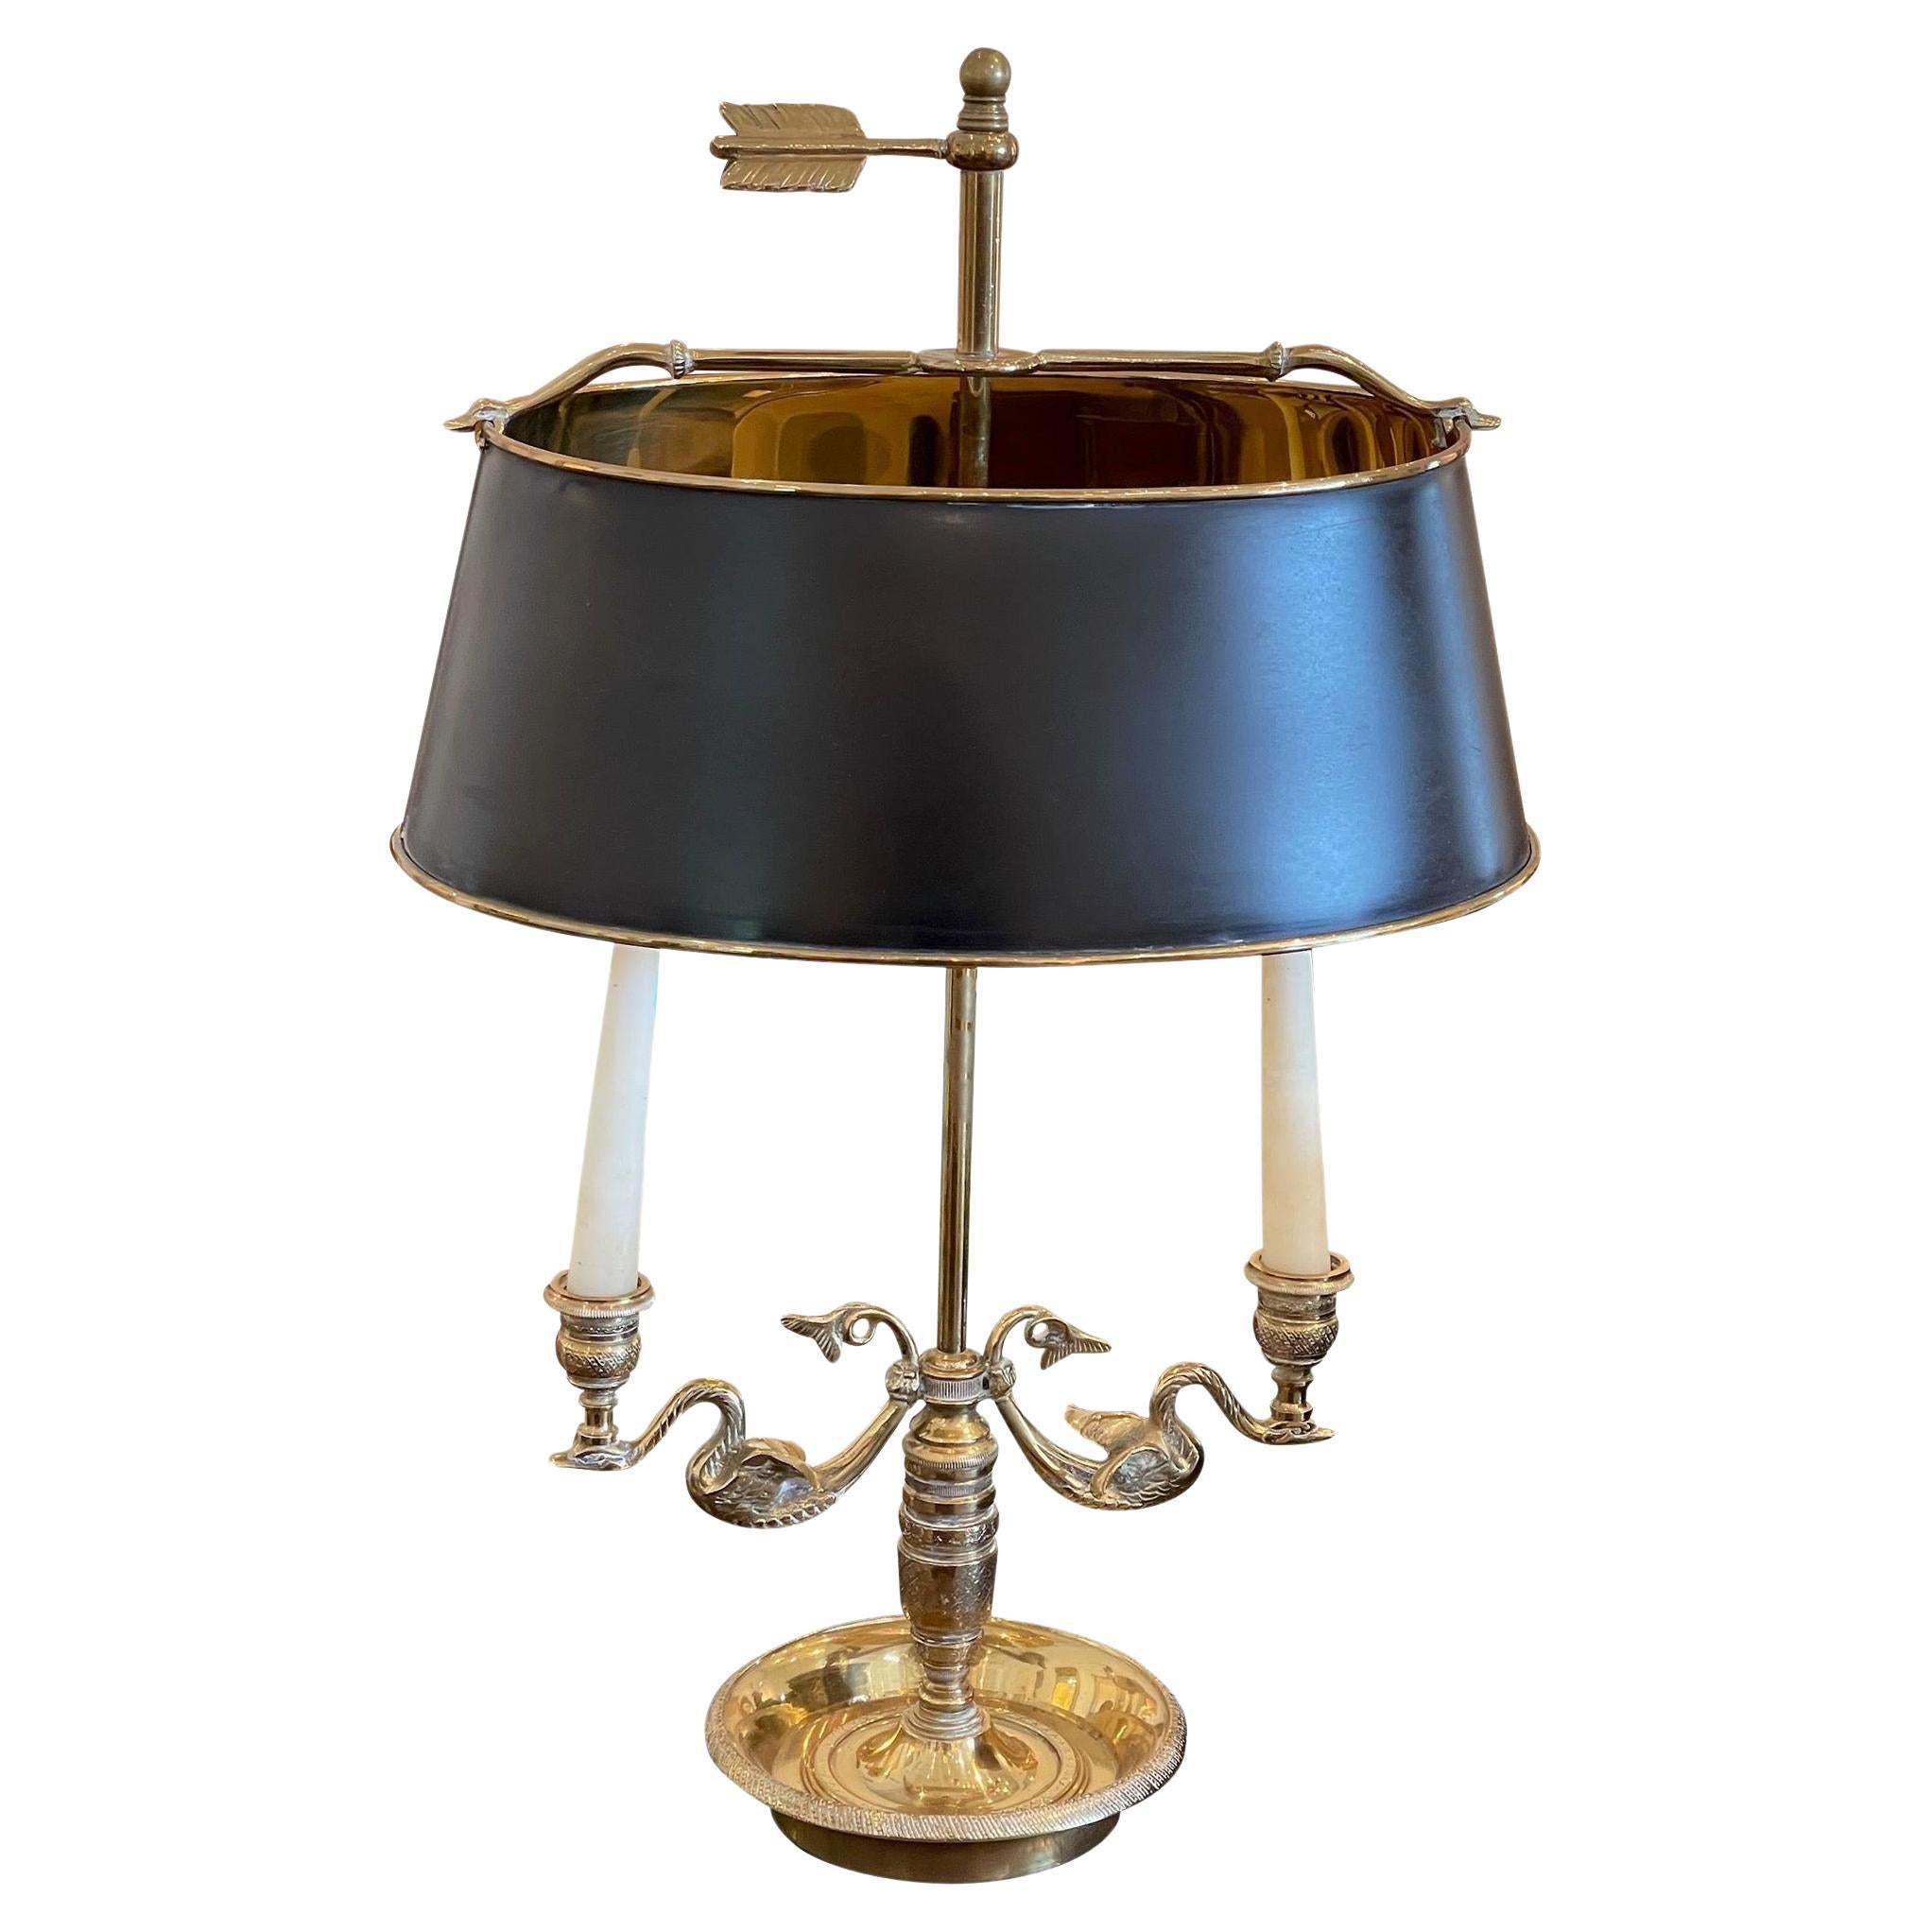 Early 20th Century Bouillotte Lamp With Candle Stick Arms